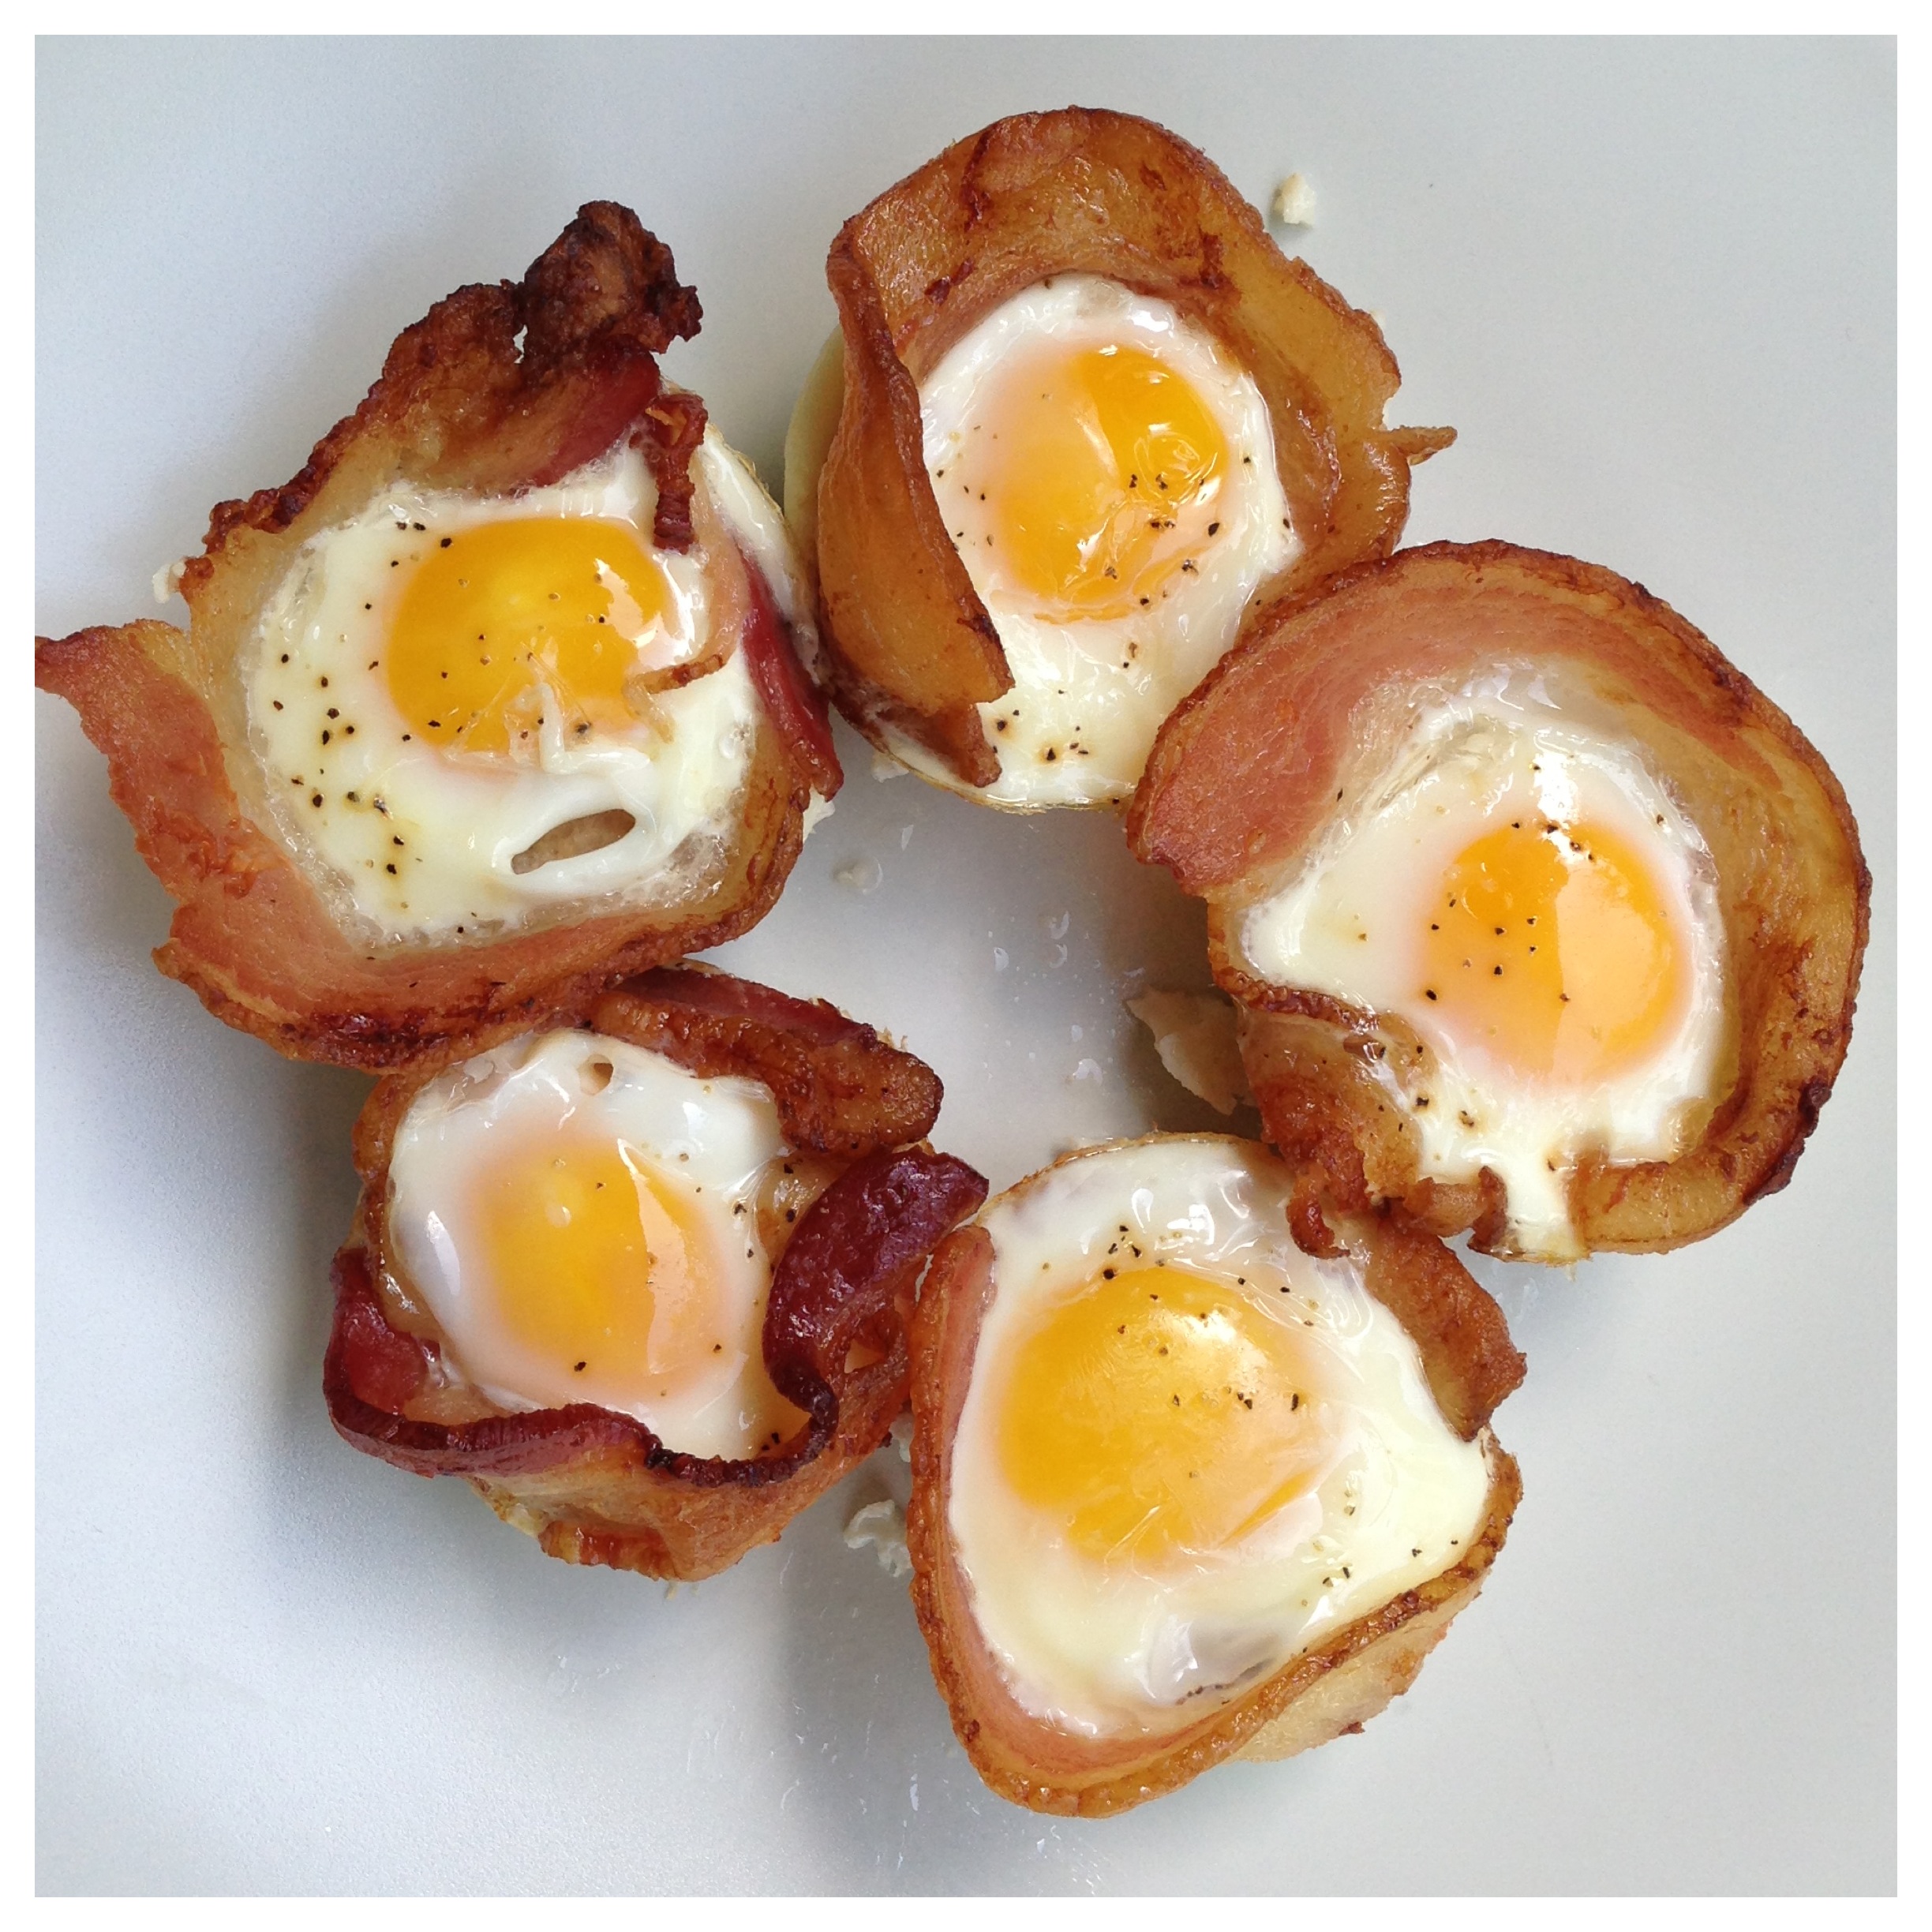 Albums 97+ Pictures Pictures Of Eggs And Bacon Sharp